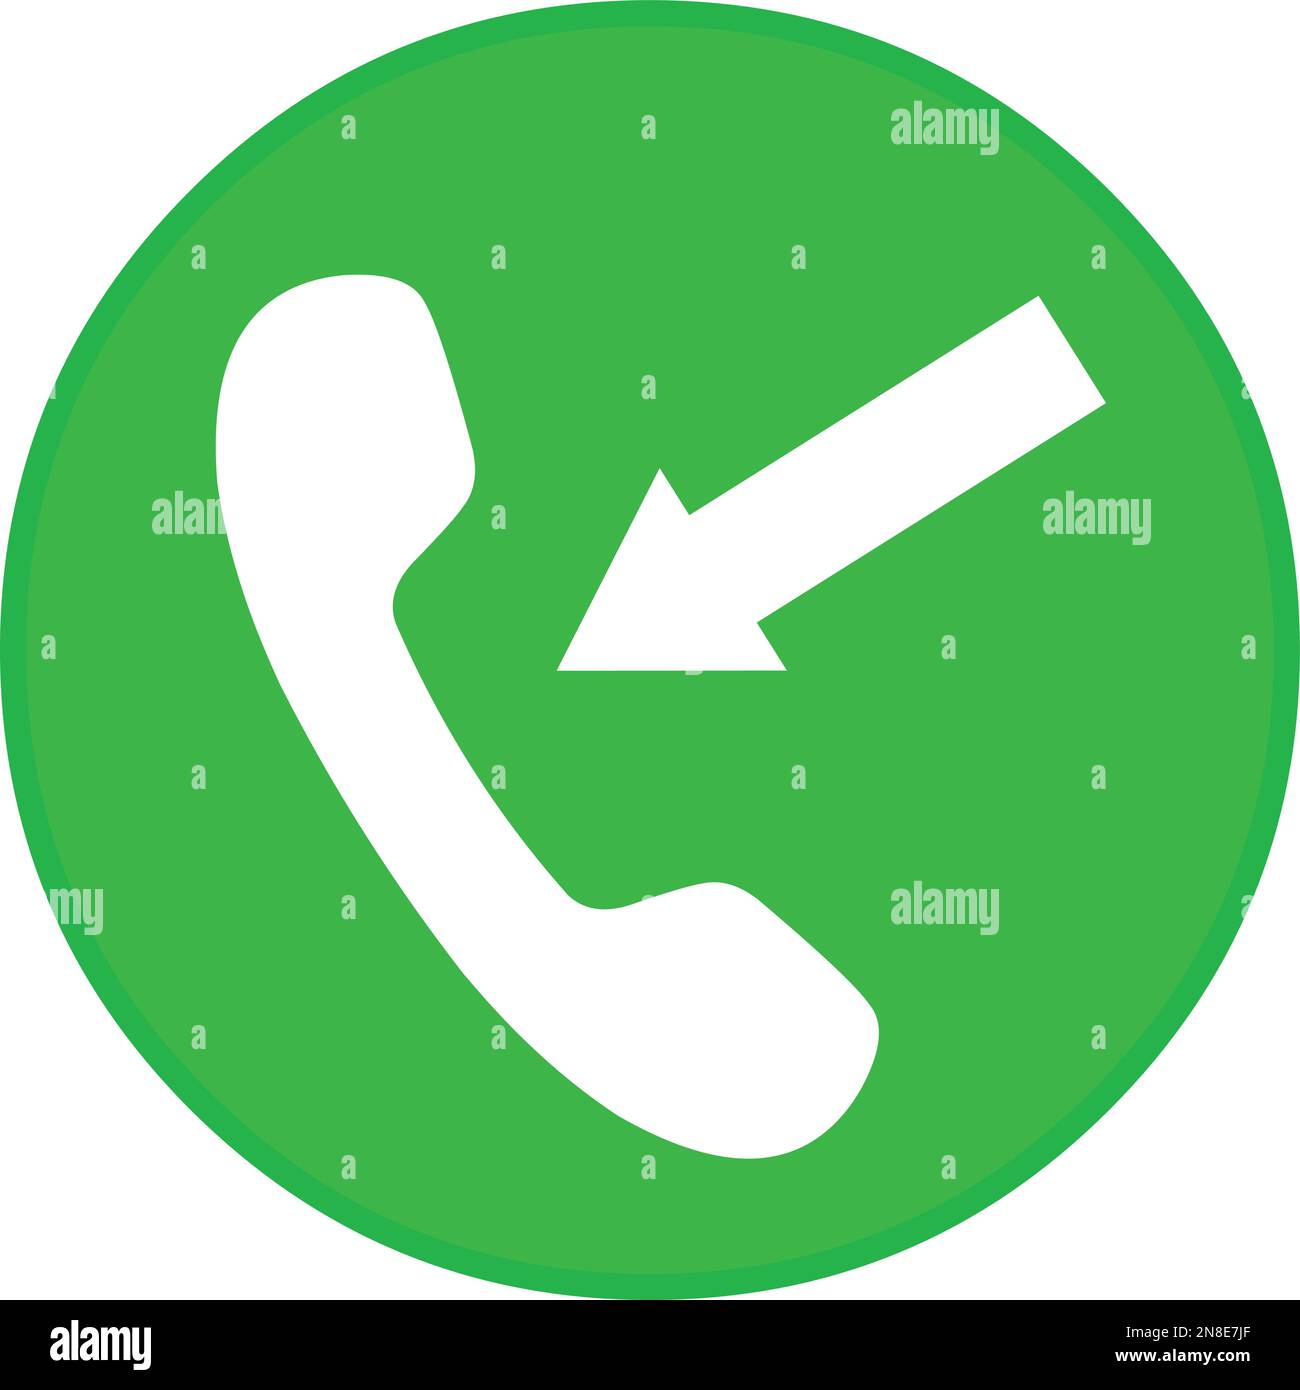 vector illustration of an arrow pointing to a telephone in a green circular base, in concept of incoming call Stock Vector